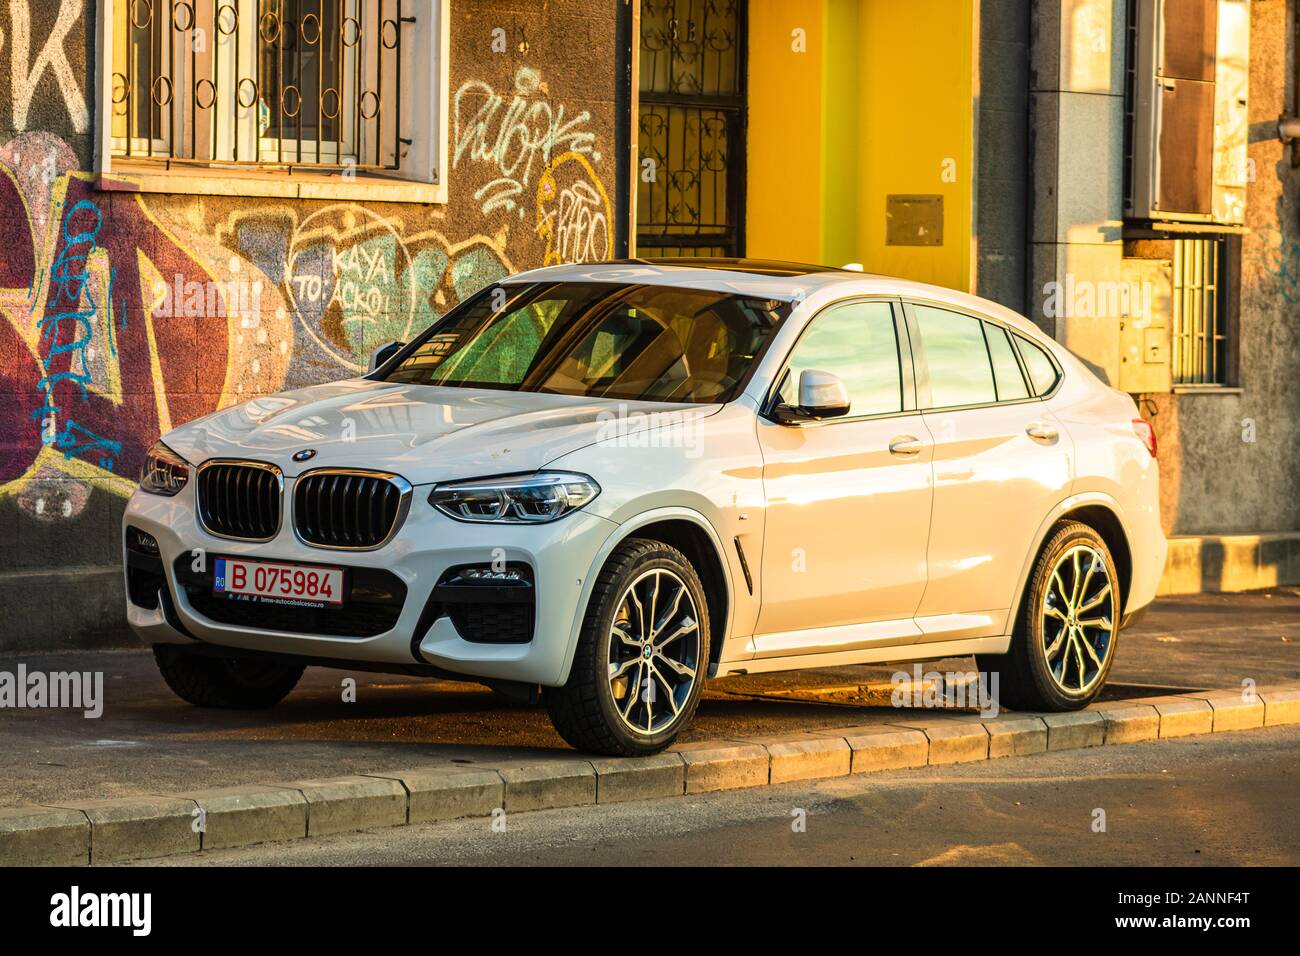 MOSCOW, RUSSIA - AUG 2012: BMW X6 E71 presented as world premiere